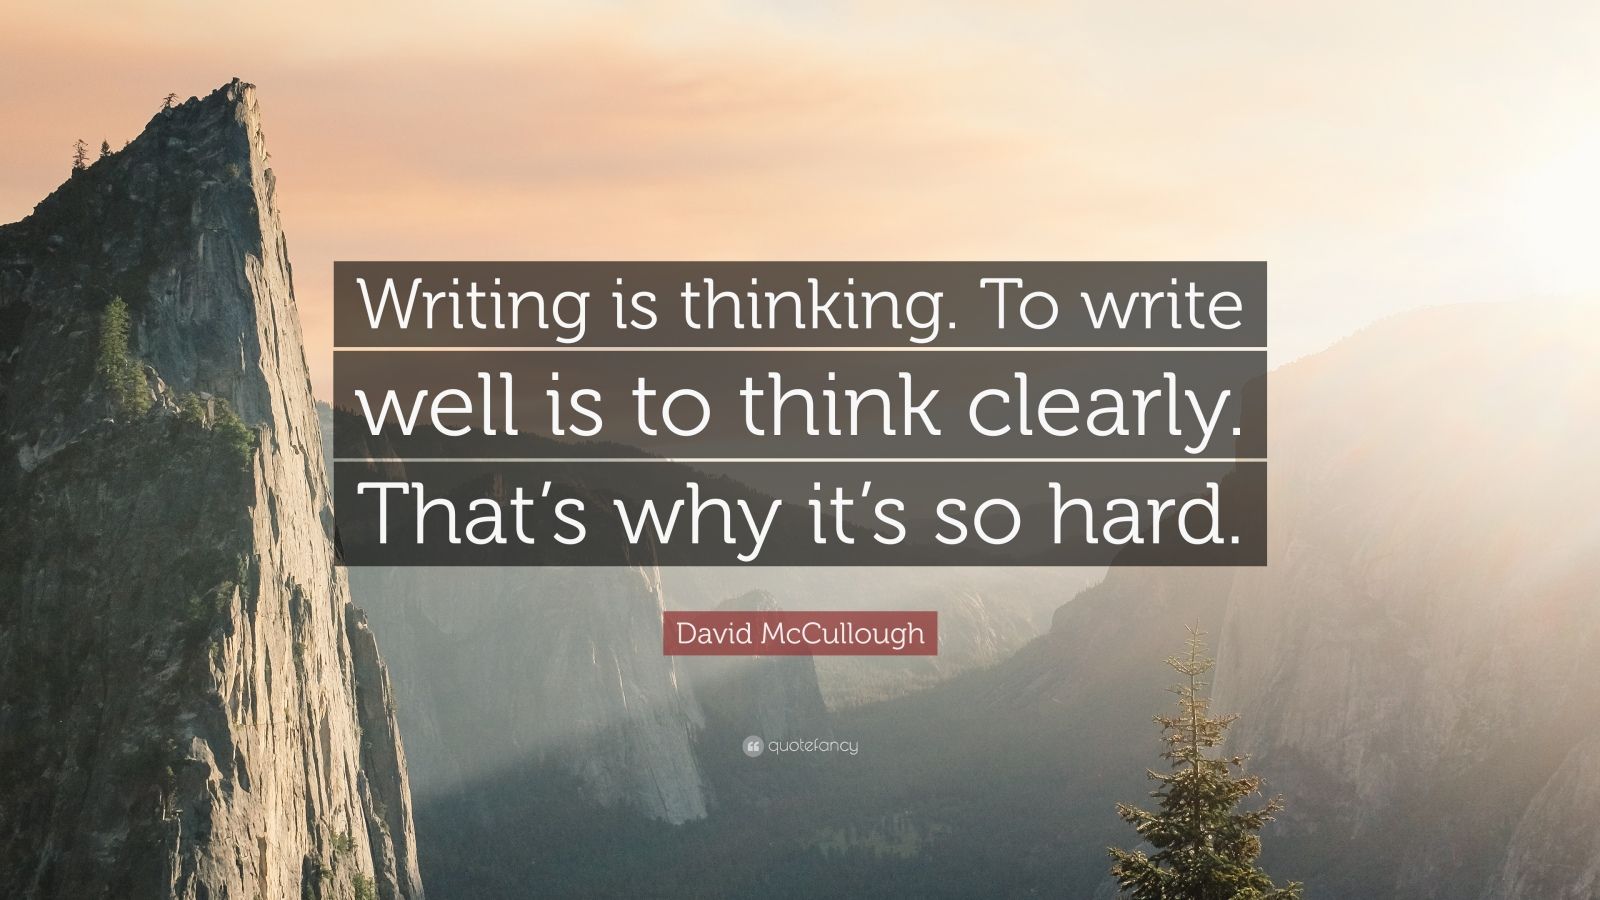 David McCullough Quote: “Writing is thinking. To write well is to think